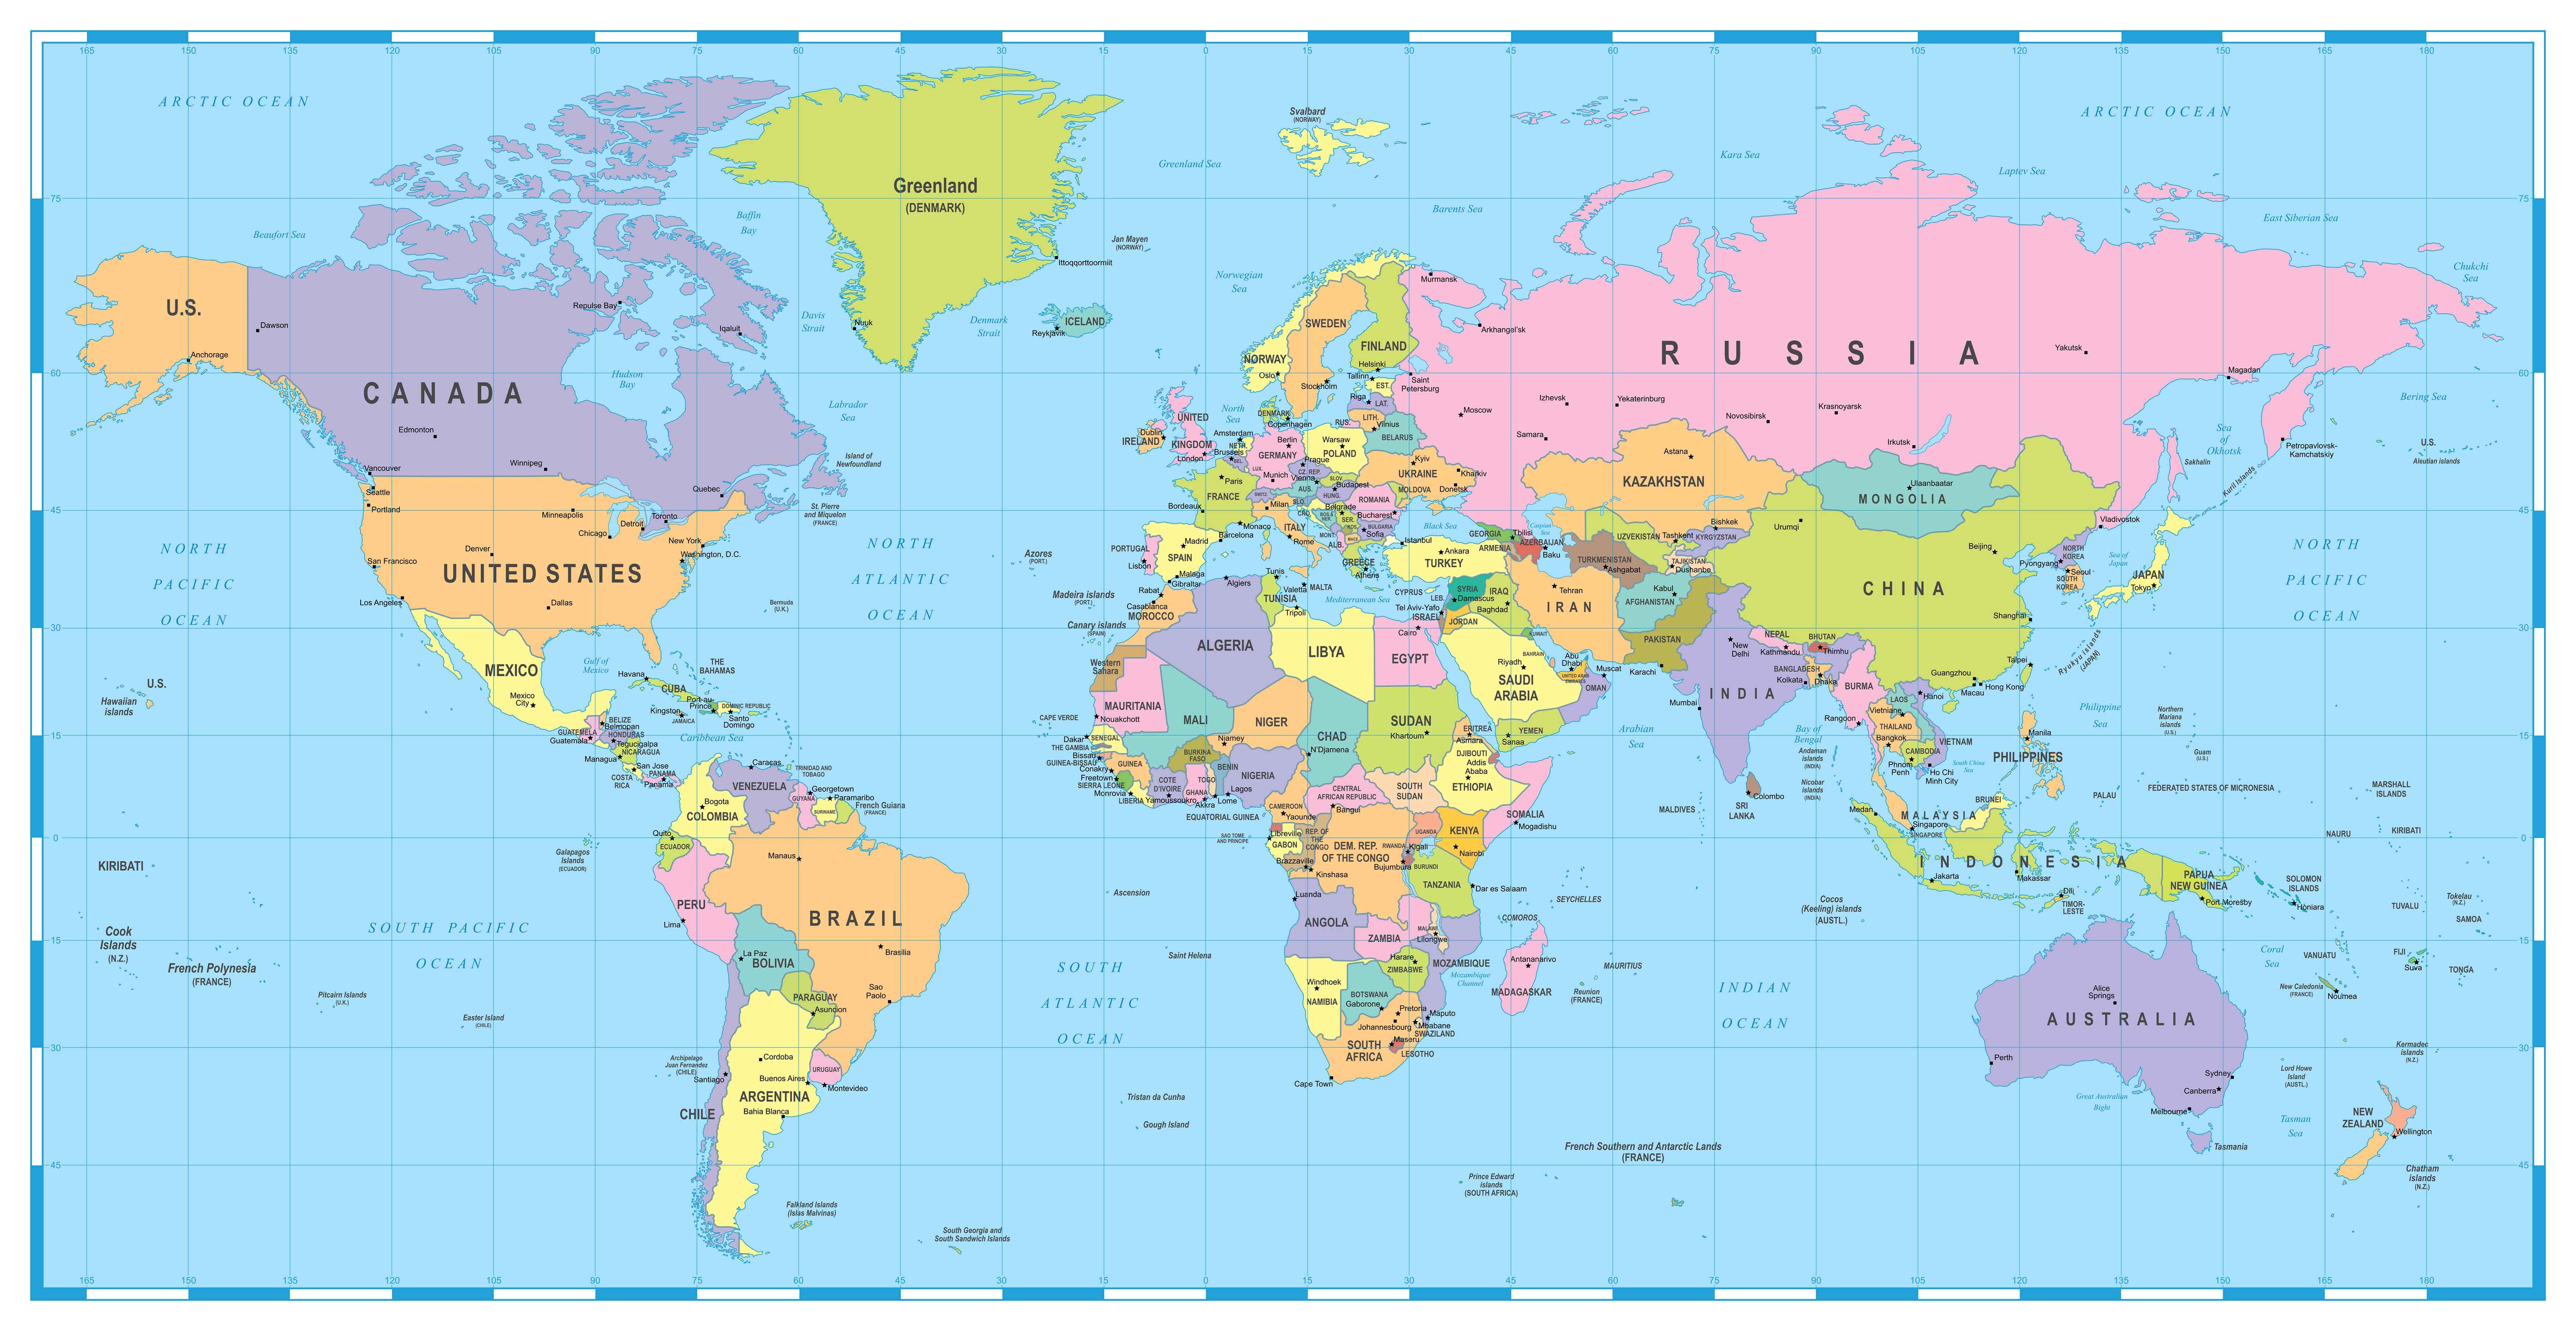 Countries, Capitals and Major Cities of the World Map